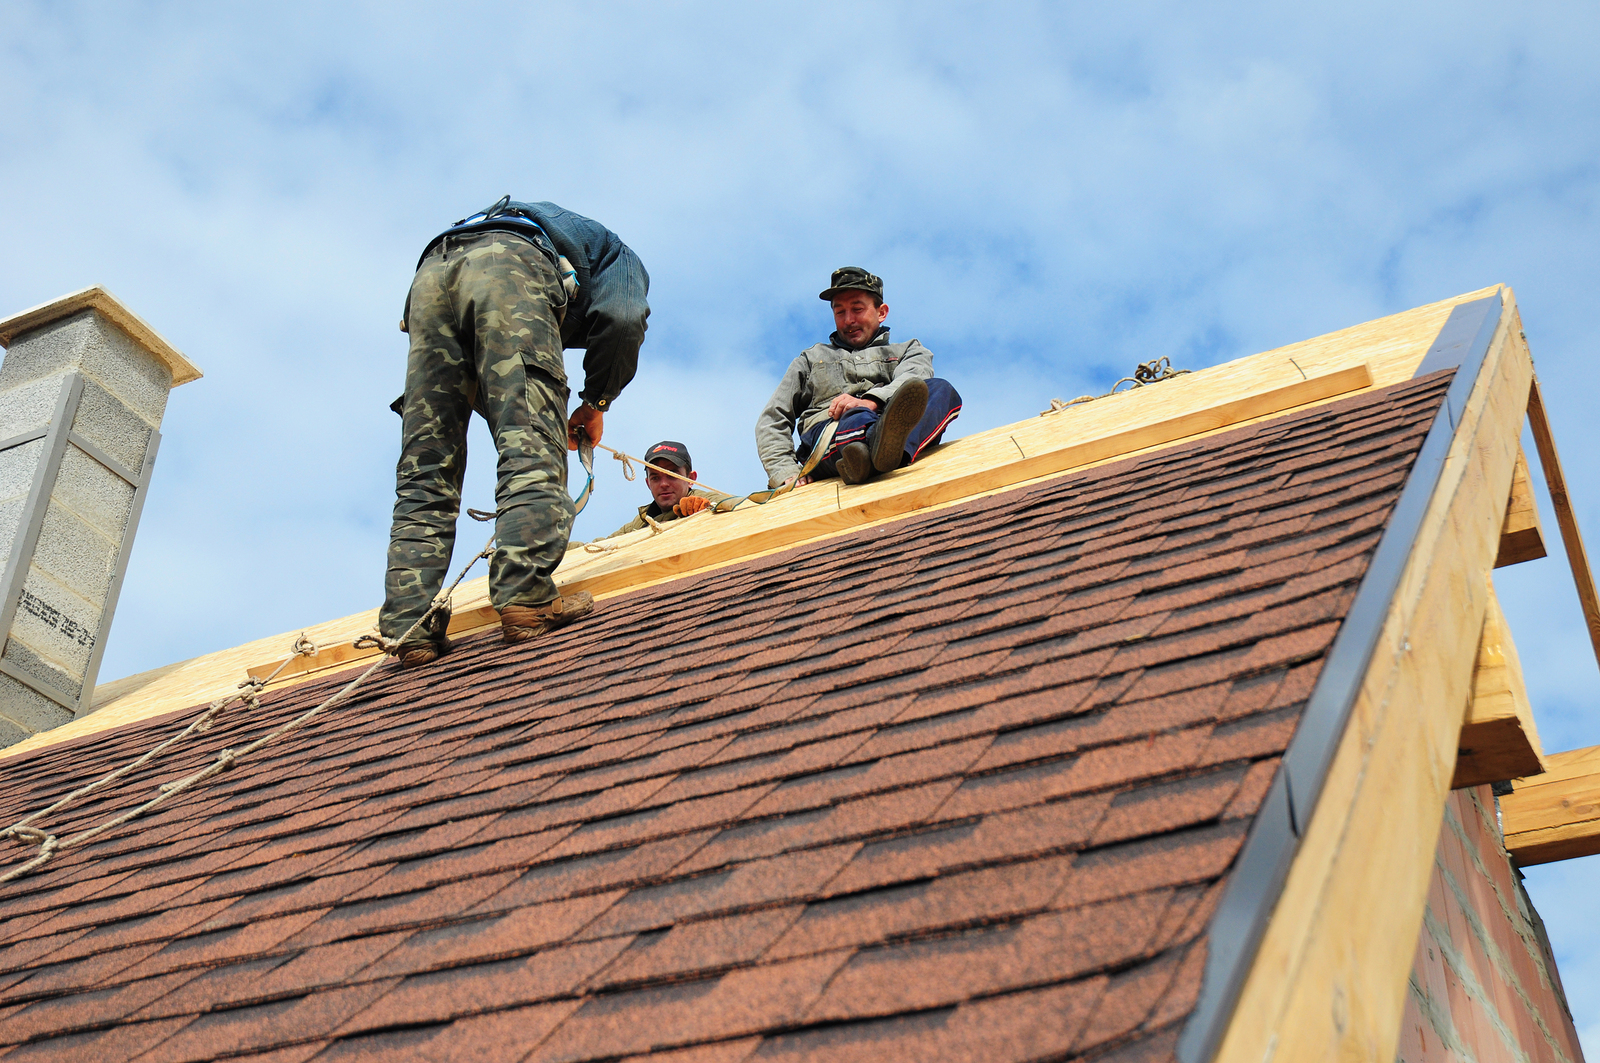 Professional Roof Installation - How to Prepare Your Home and Family